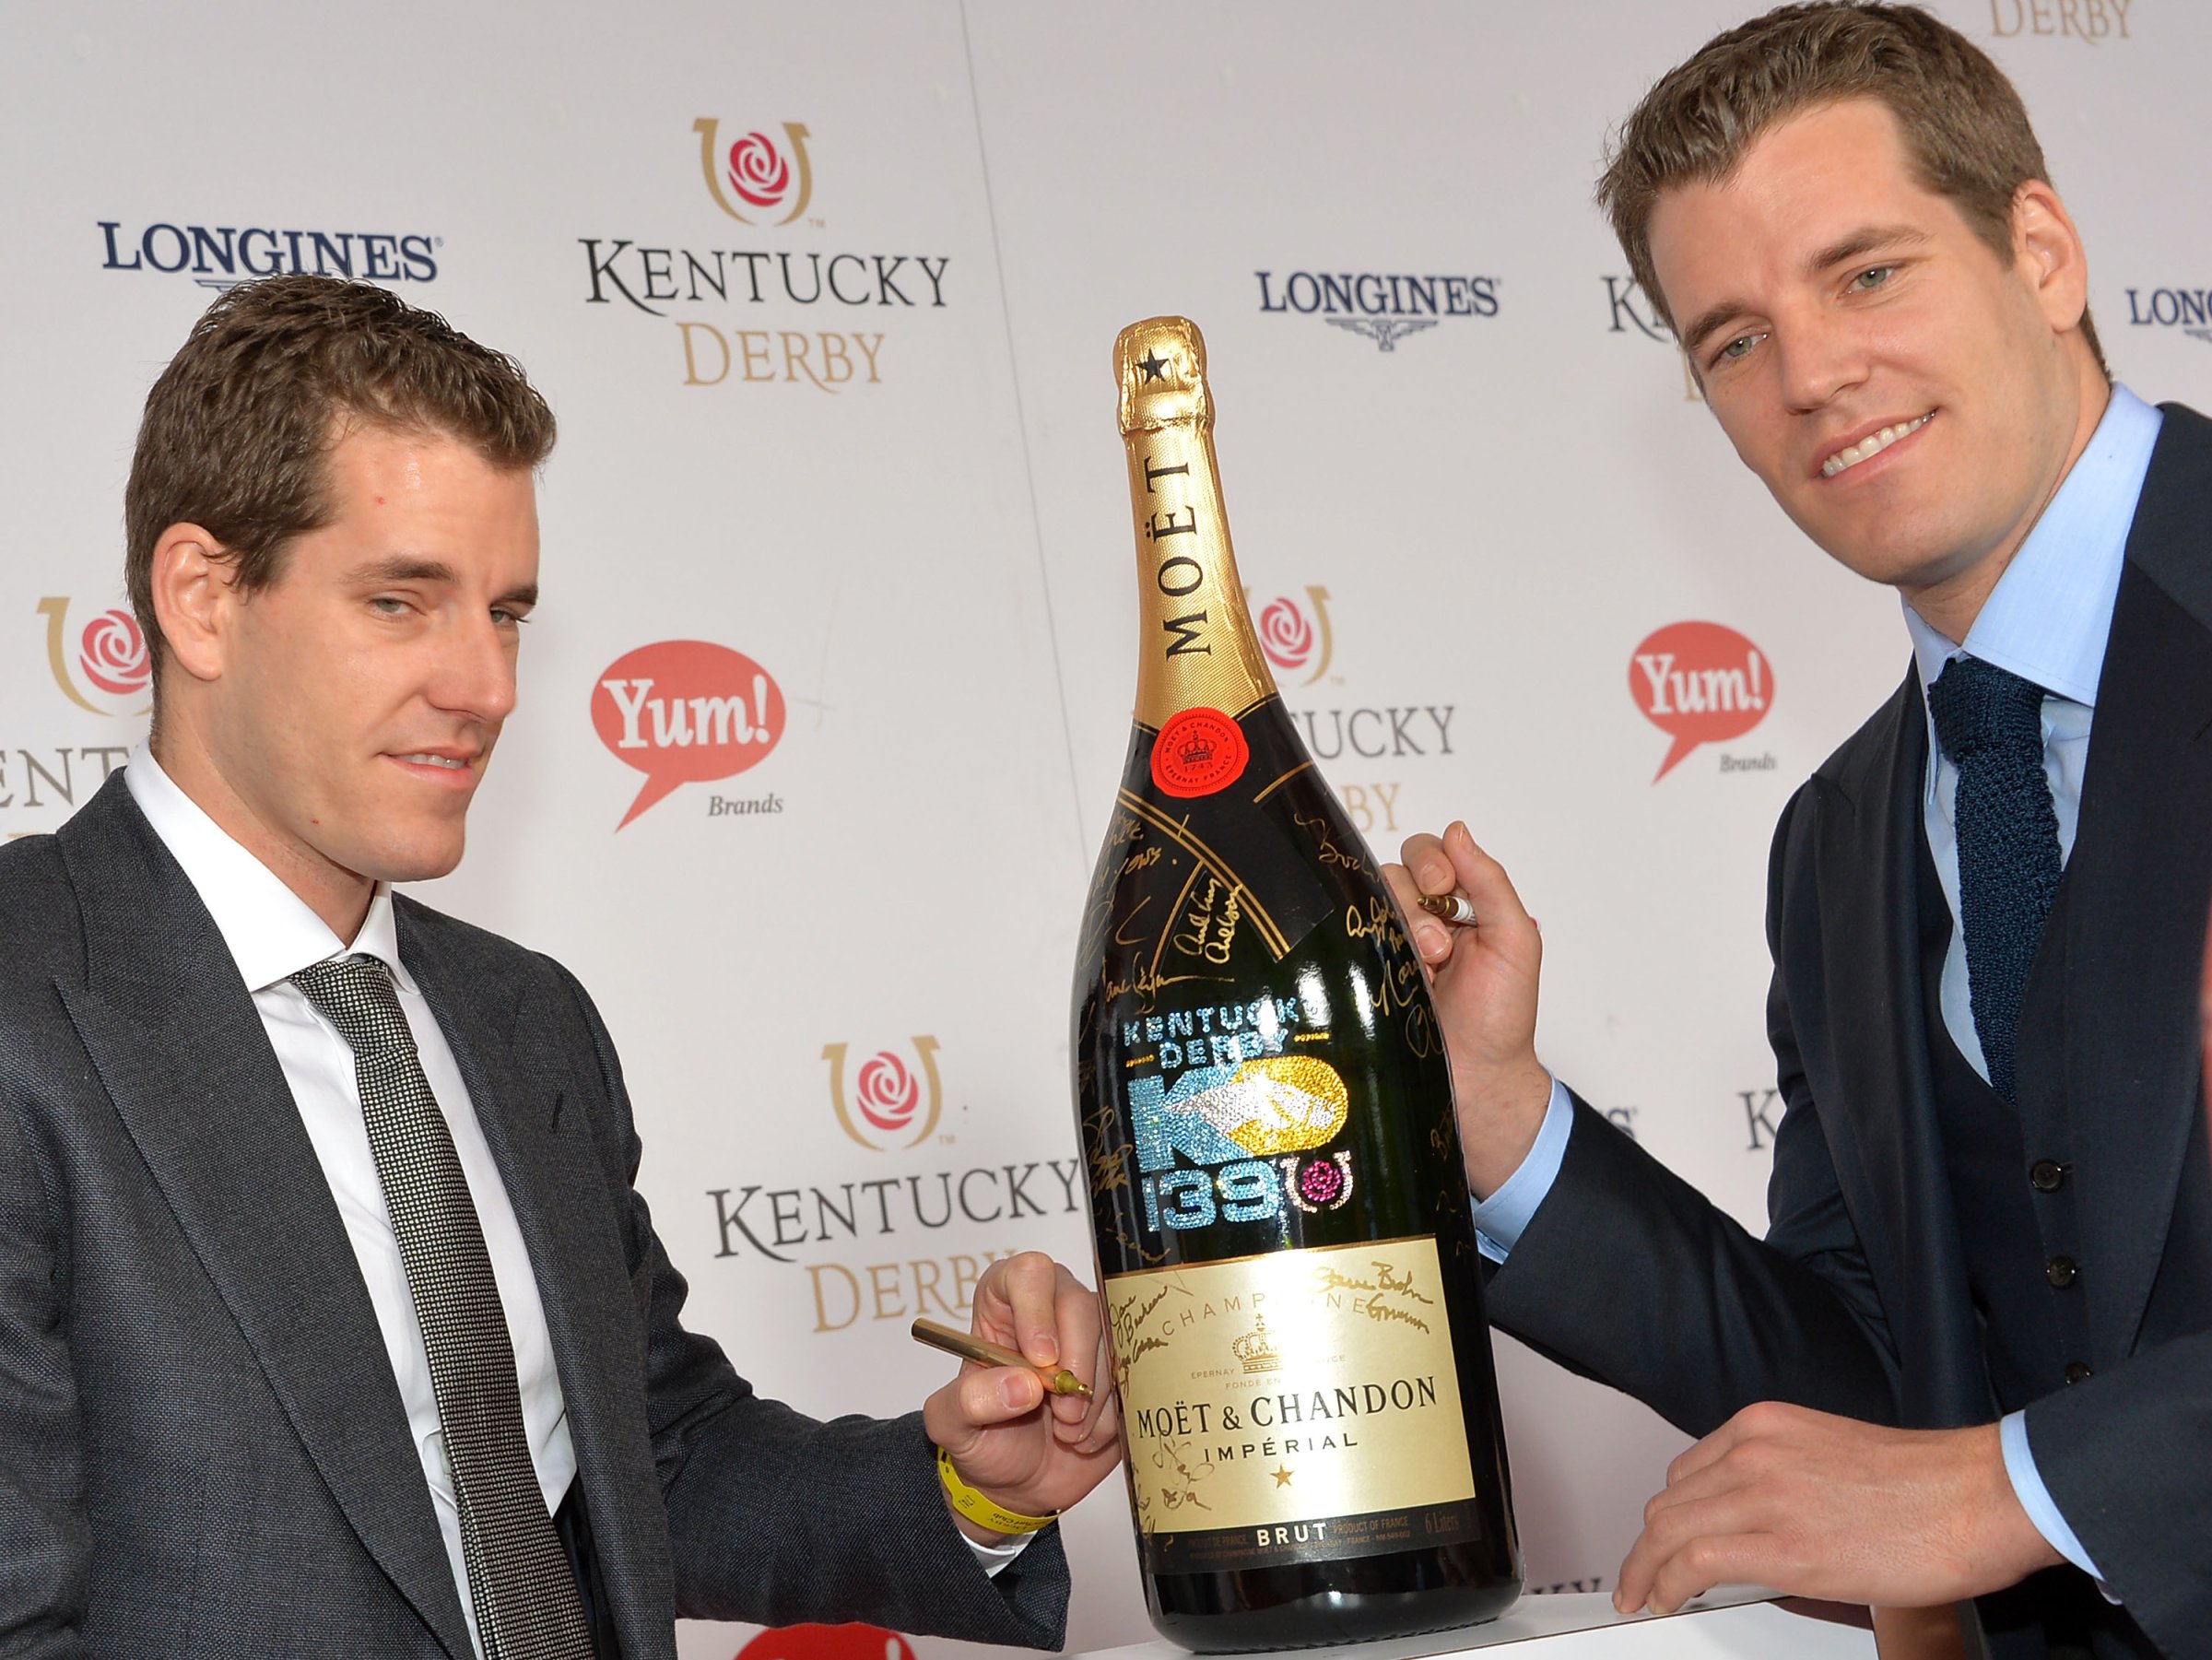 Moet & Chandon Toasts The 139th Kentucky Derby - Day 2